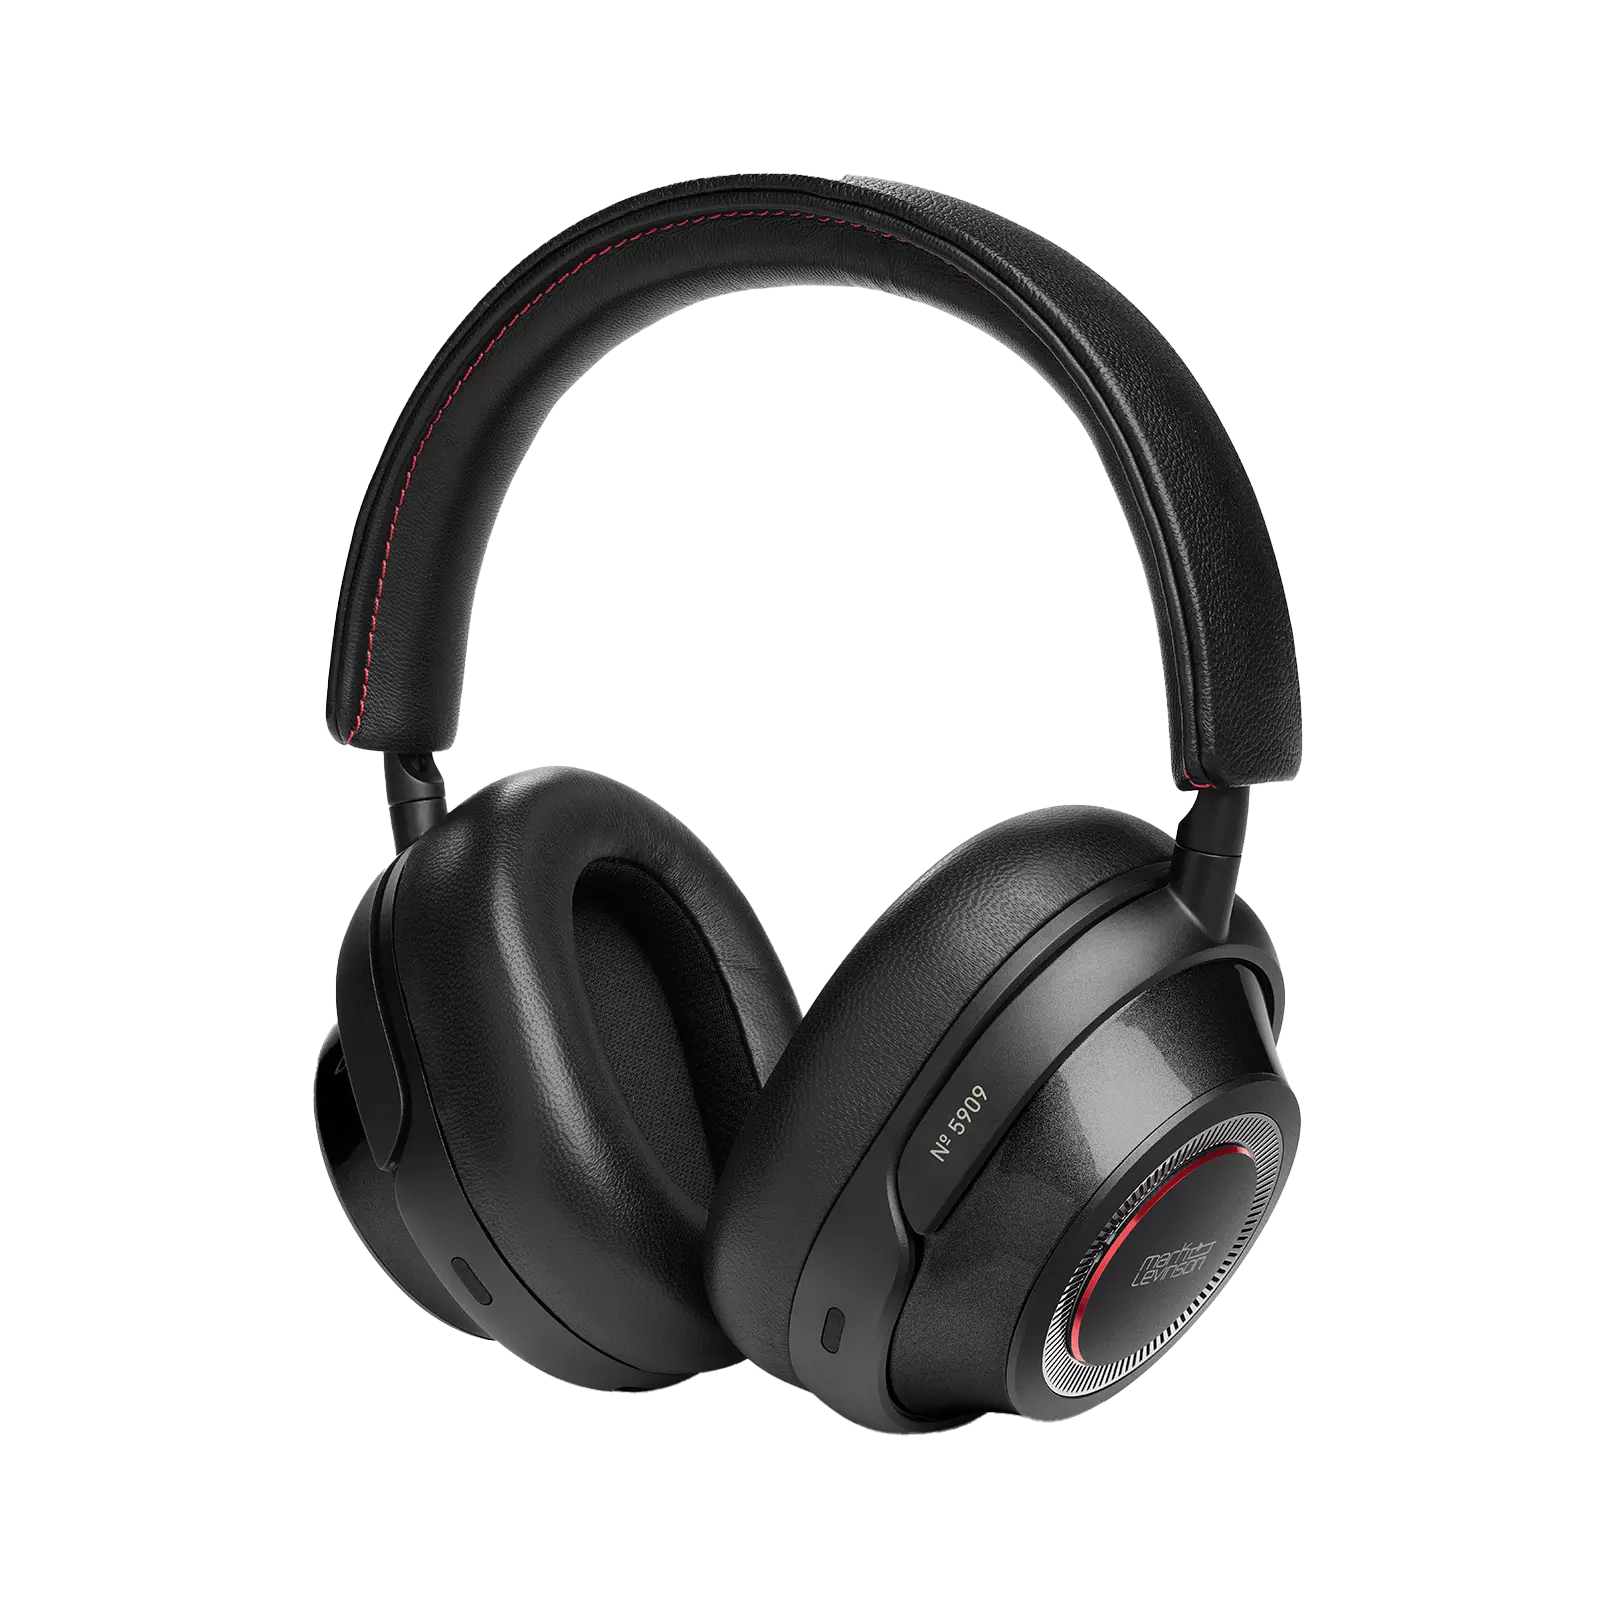 Mark Levinson No. 5909 / NO5909 - High Resolution Wireless Headphones with Adaptive Active Noise Cancellation